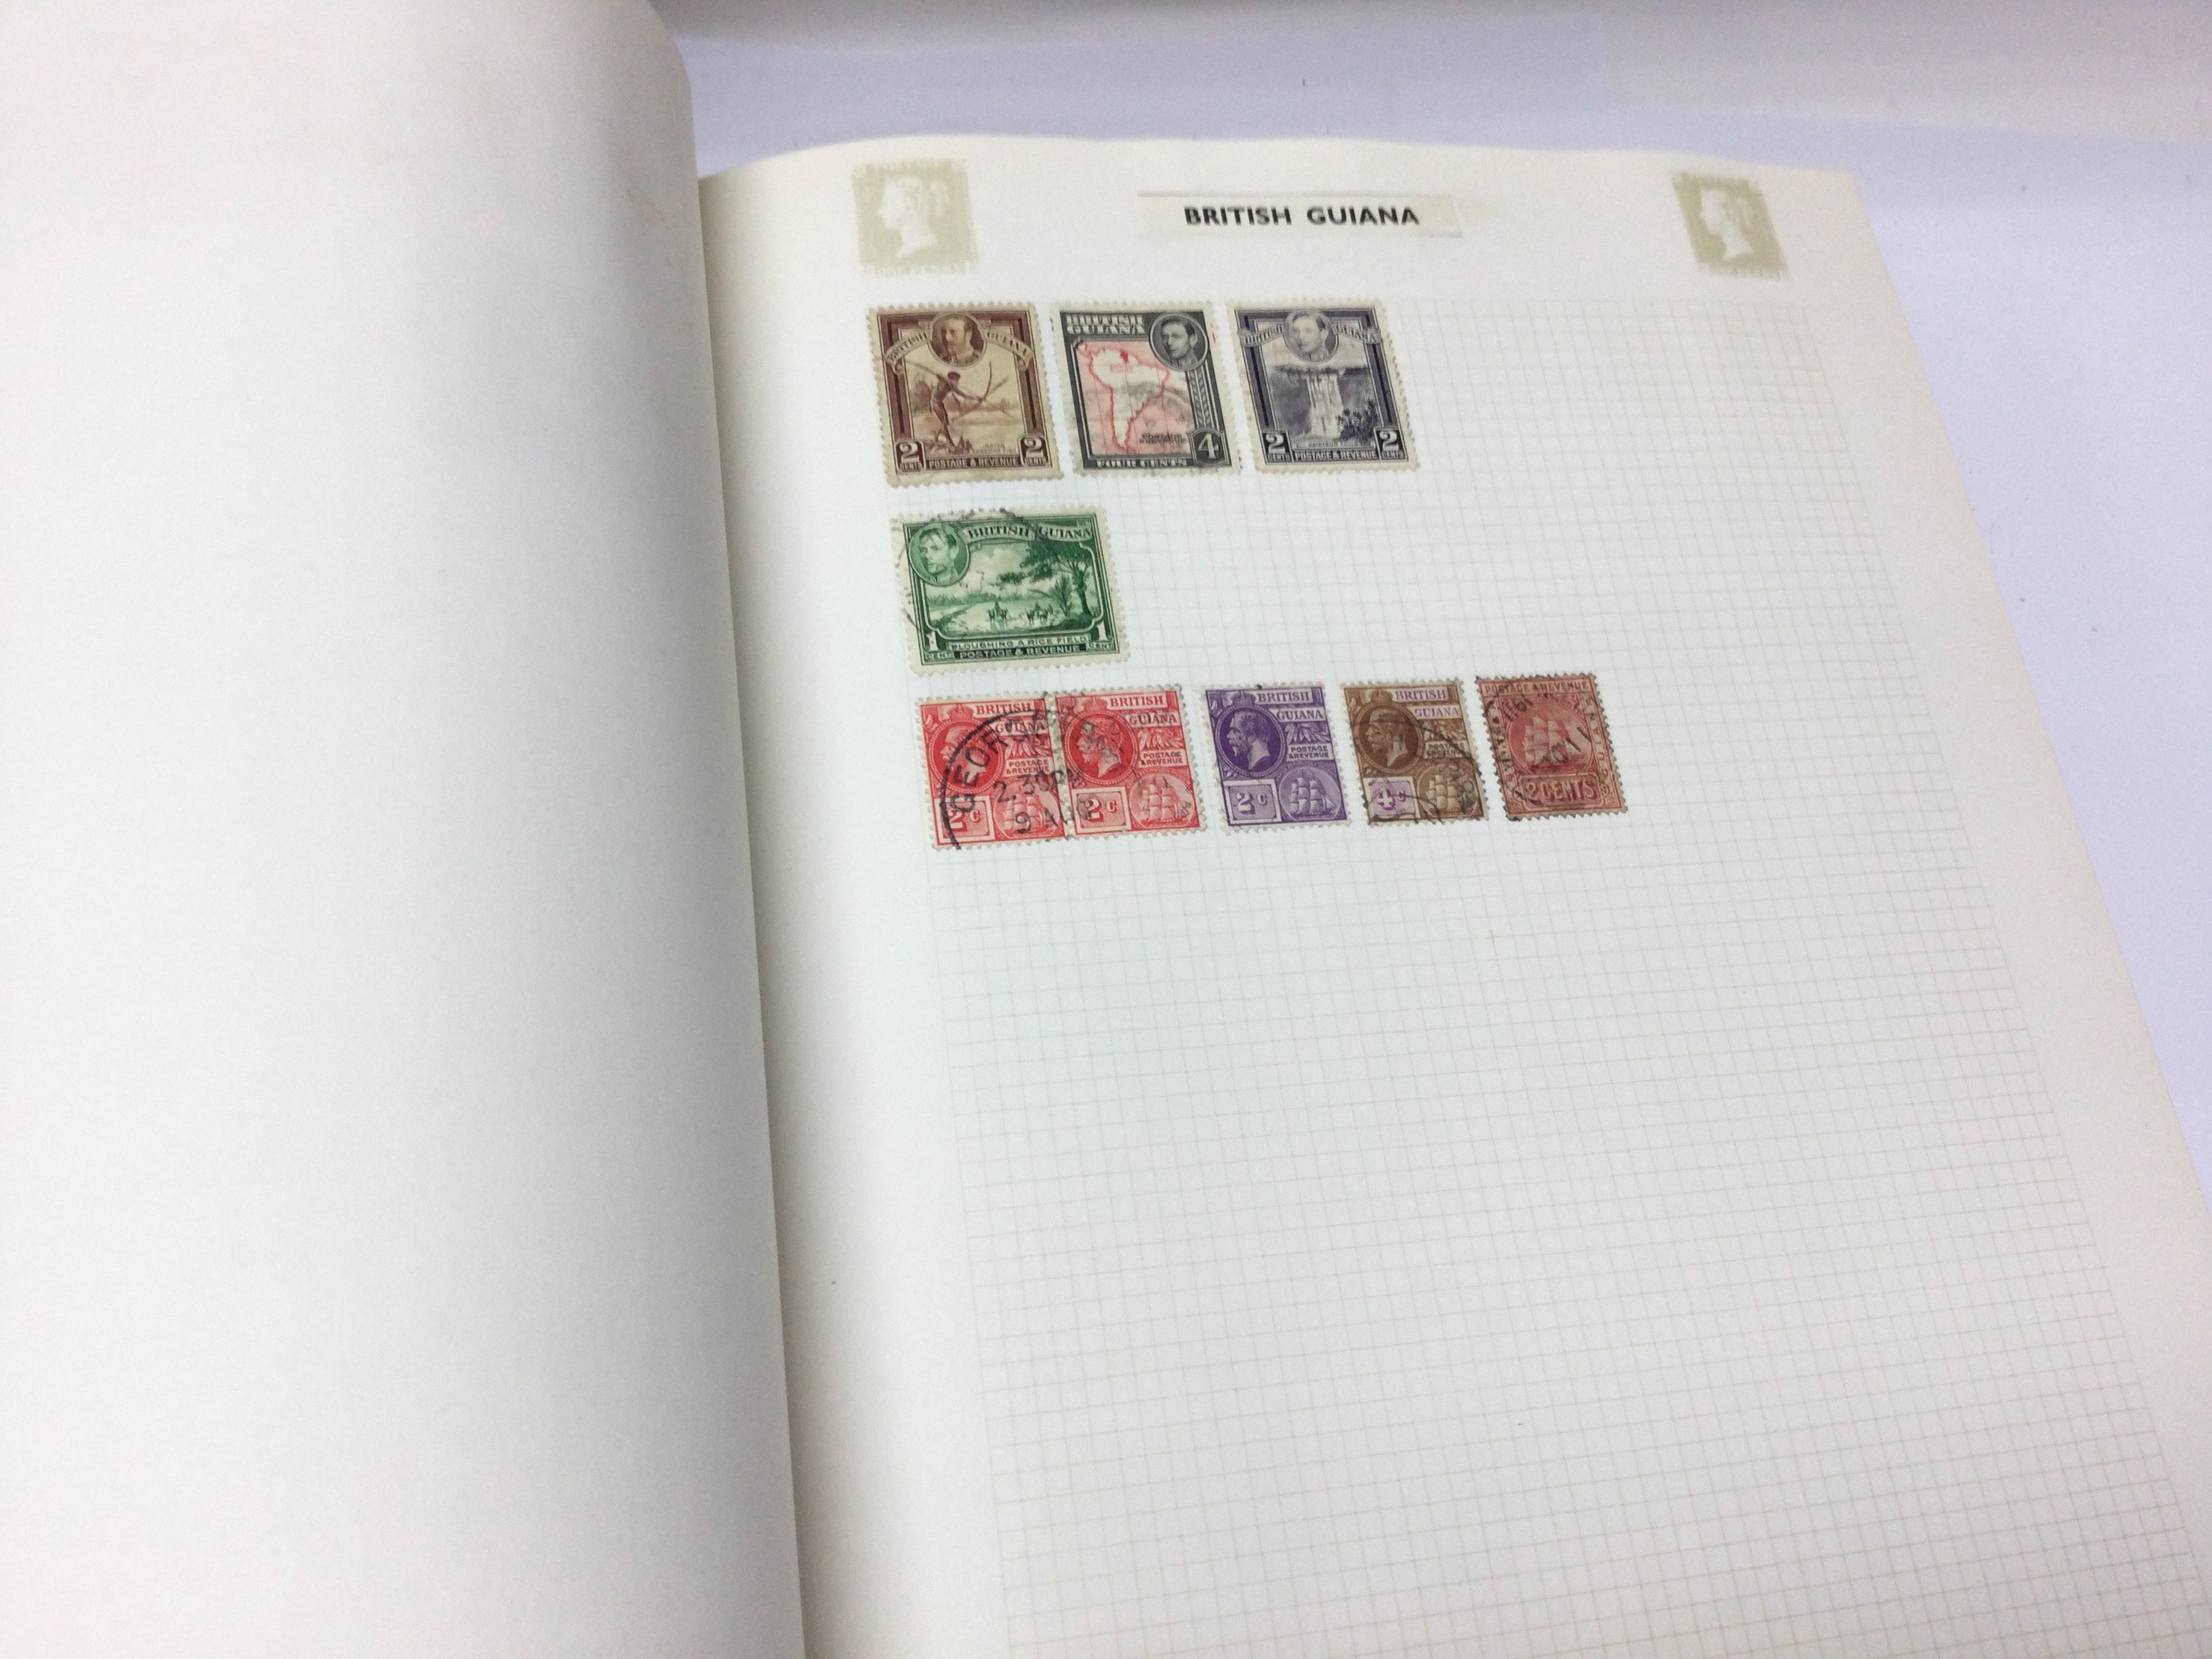 Stanley Gibbons stamp album and a collection of lo - Image 11 of 11